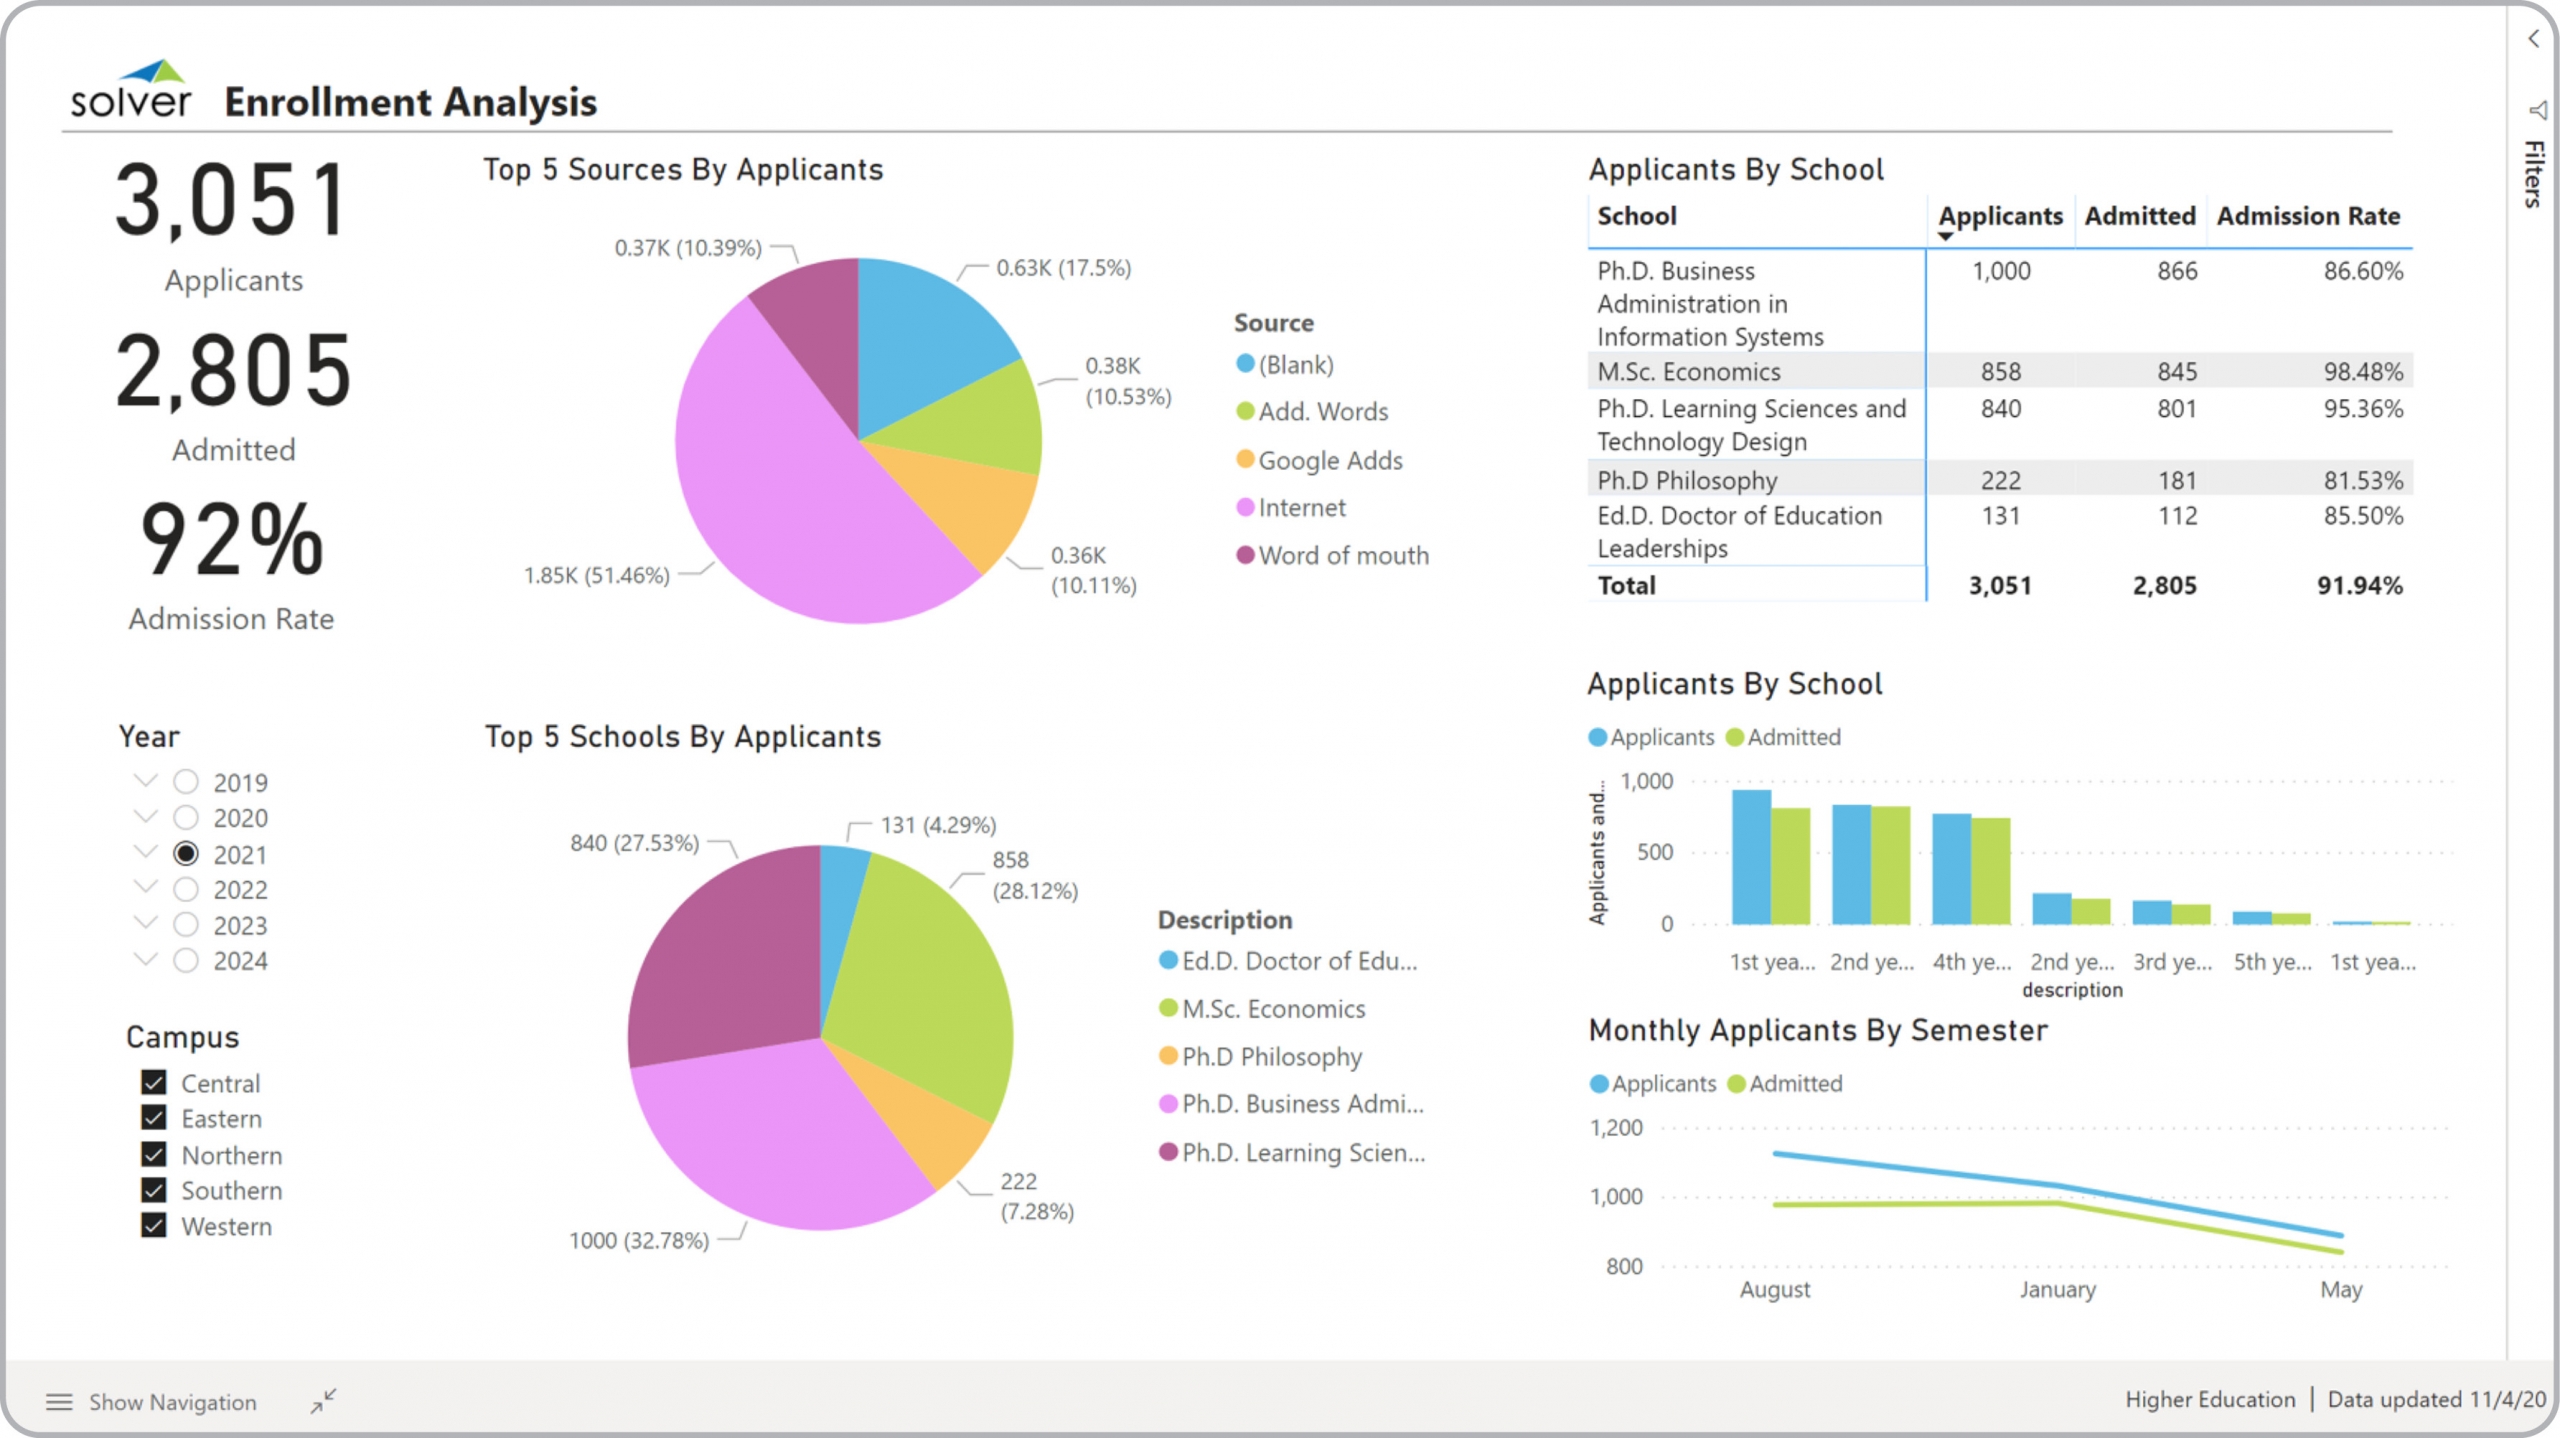 Example of a Student Enrollment Dashboard for Higher Education Institutions  